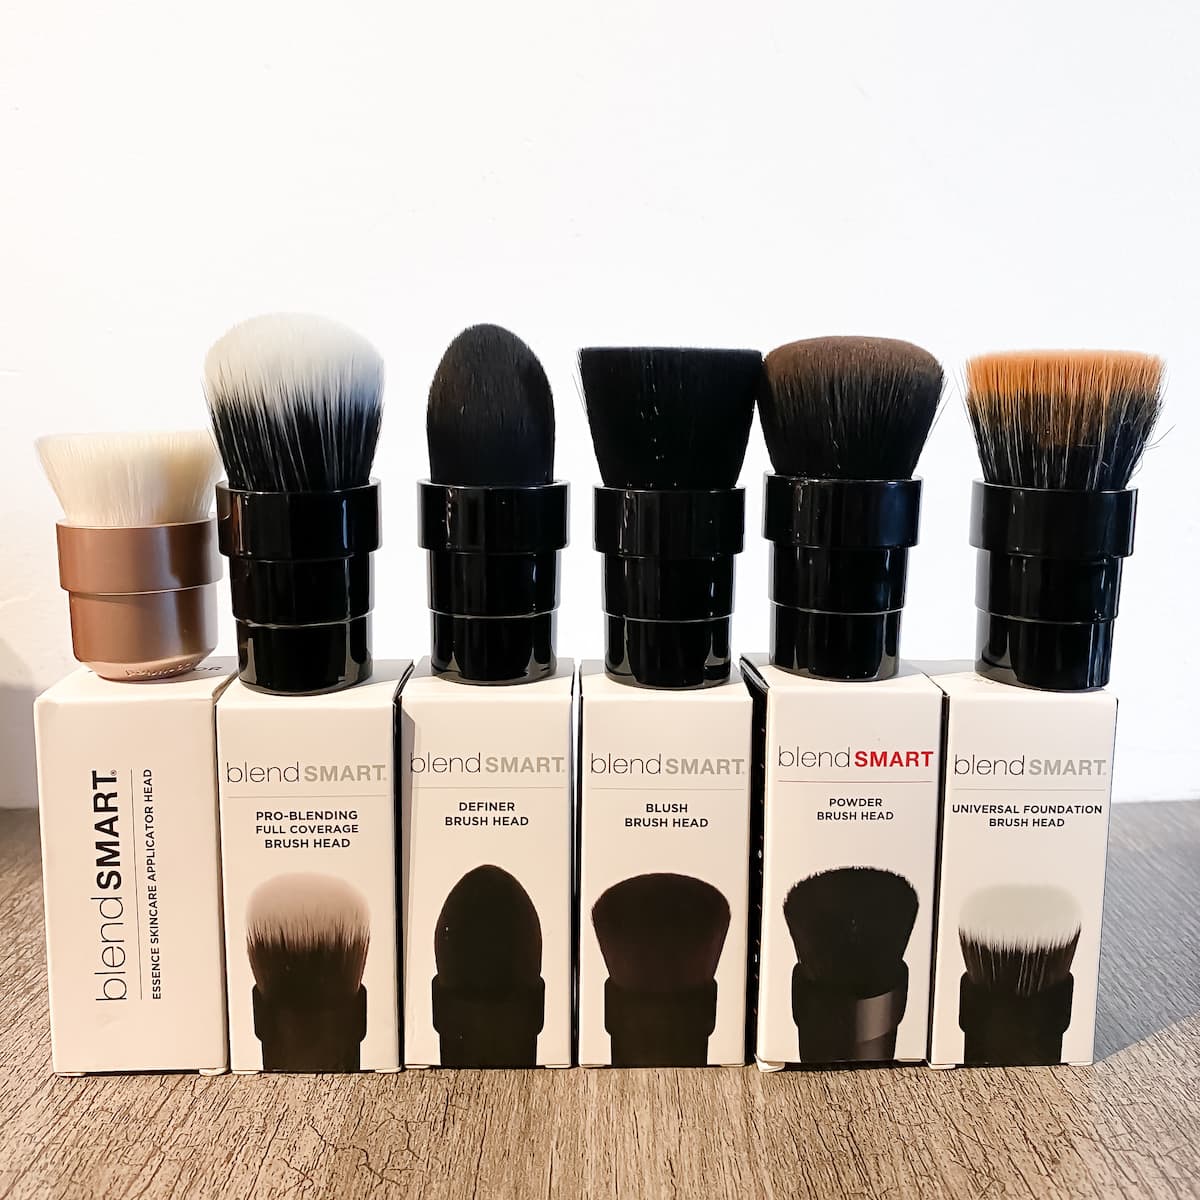 I TRIED the BlendSMART Automated Makeup Brush System that everyone is talking about. Is it WORTH it? Read my blendSMART review before you spend any money.